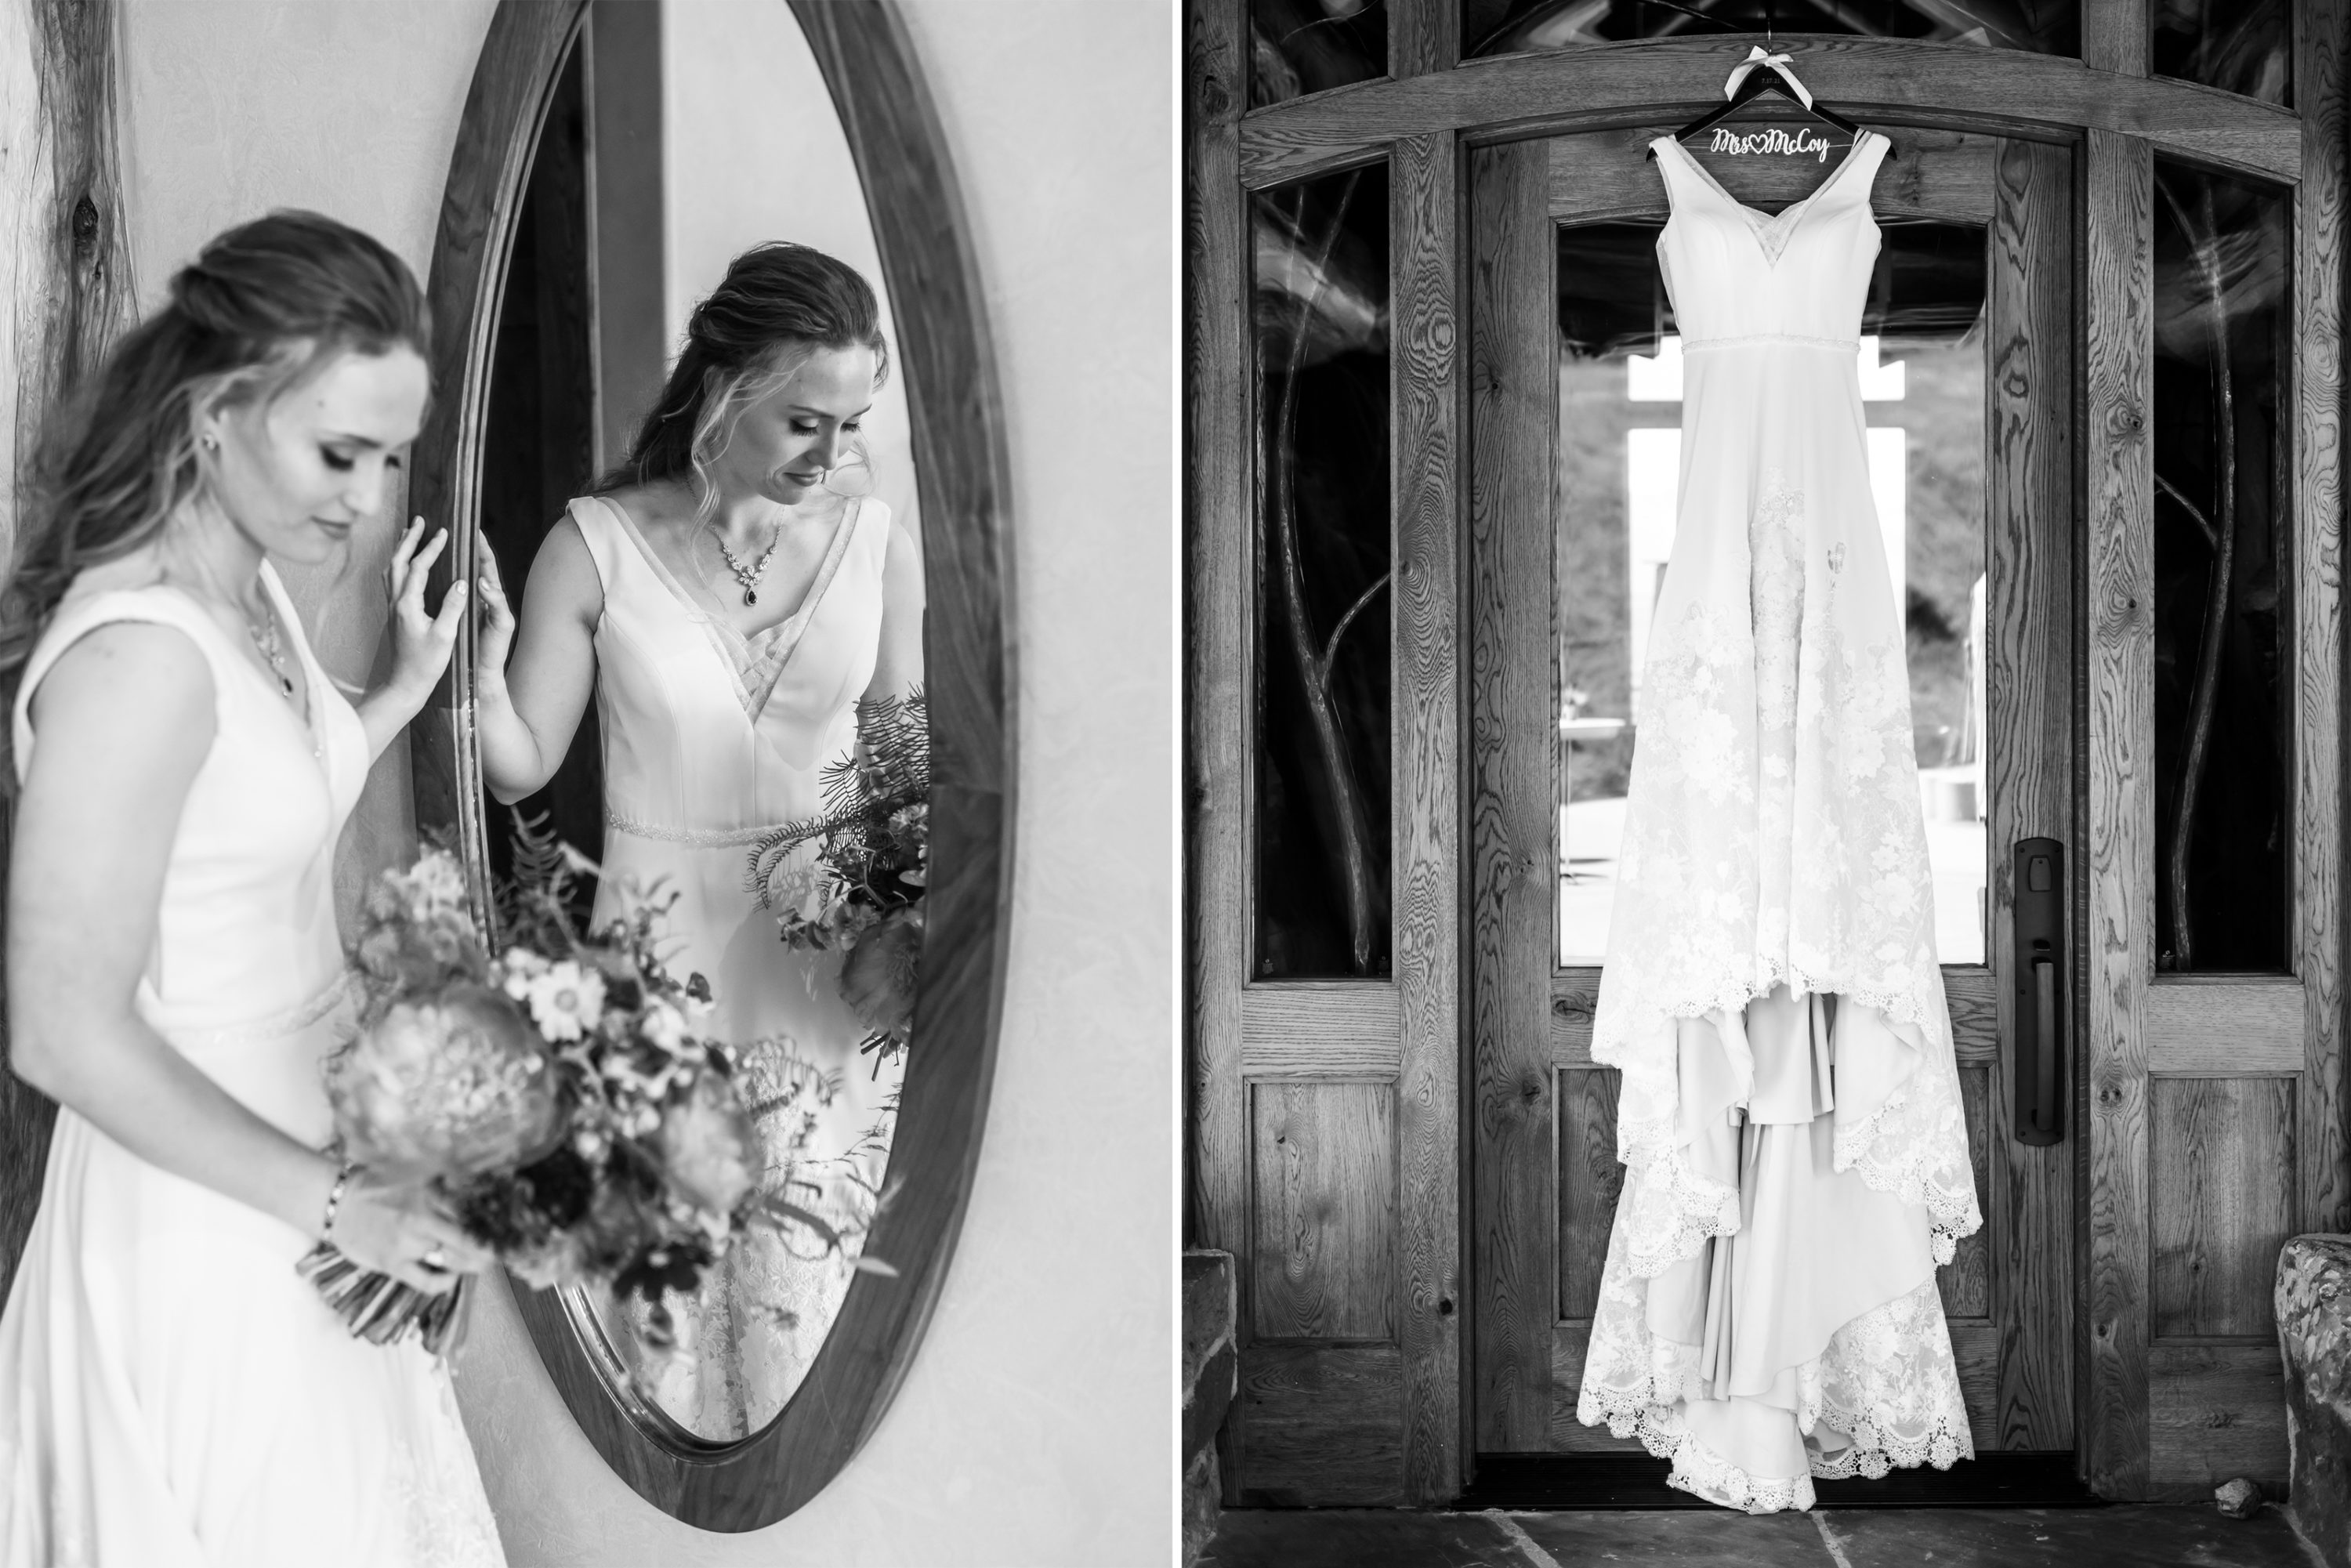 In the left frame, the bride looks down away from a mirror, and in the second frame, the dress hangs before her wedding in Telluride, Colorado.